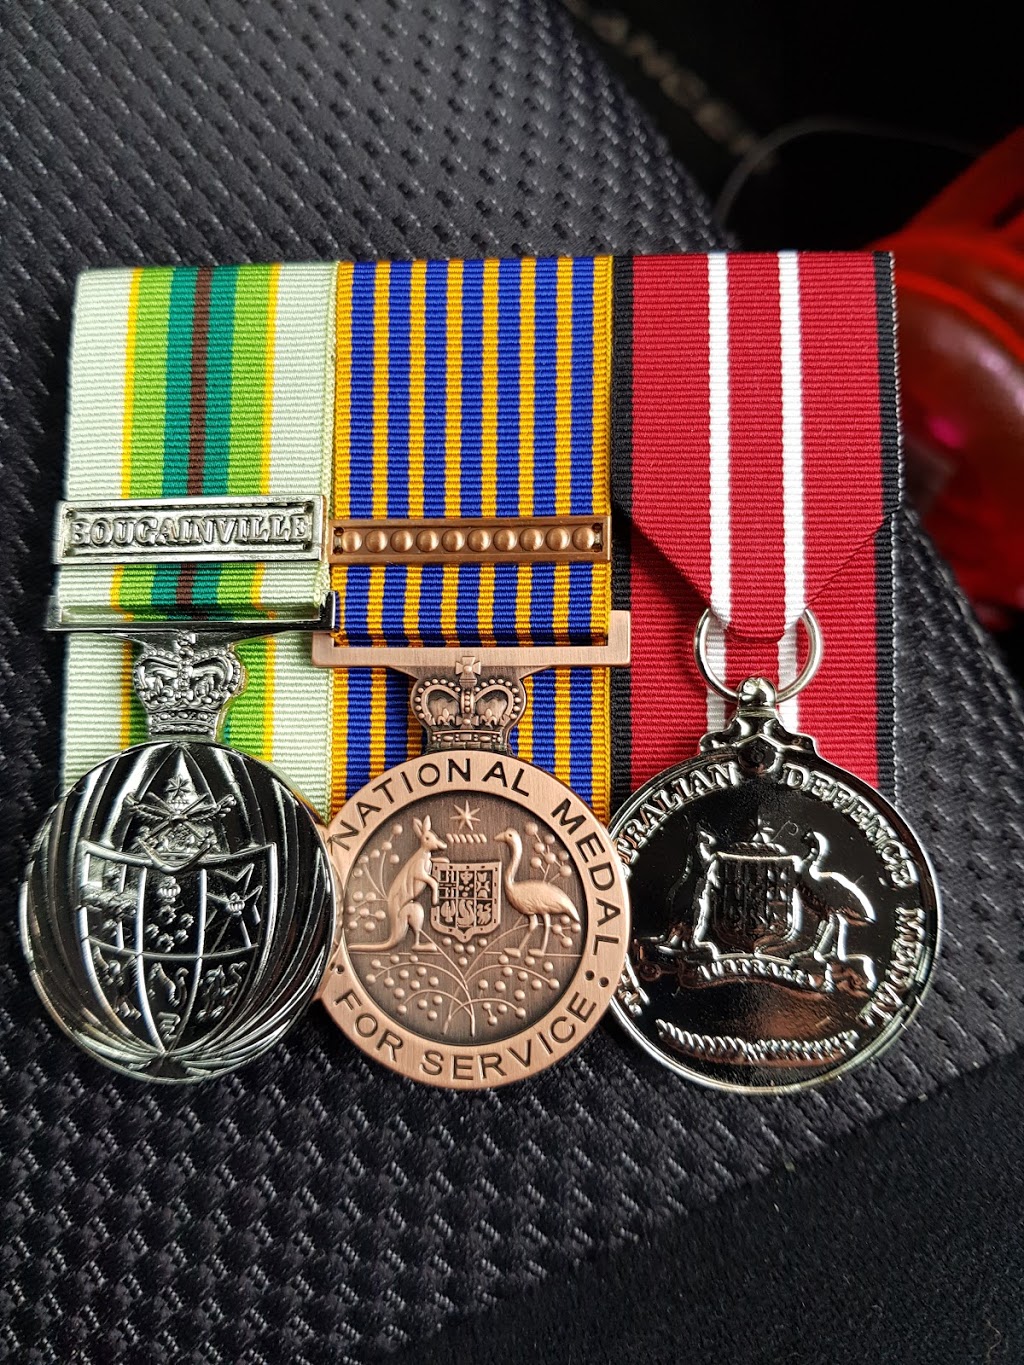 Jacks Medals And Militaria Pty Ltd | store | 7 Lawndale Ave, North Rocks NSW 2151, Australia | 0298718015 OR +61 2 9871 8015